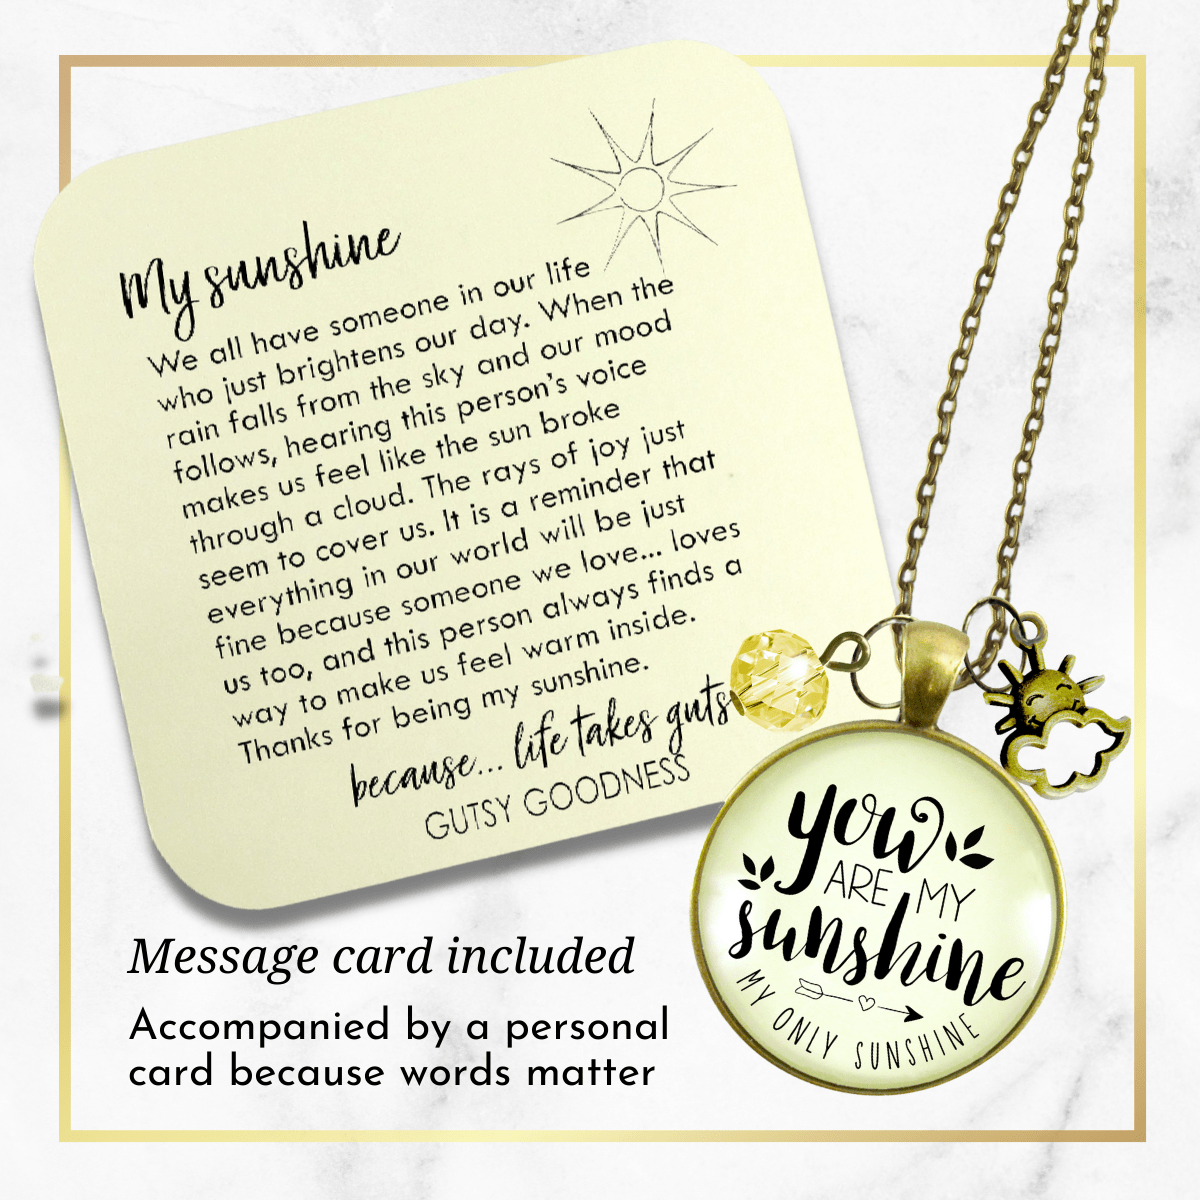 Gutsy Goodness You are My Sunshine Necklace Friendship Jewelry Inspired Sun Charm - Gutsy Goodness Handmade Jewelry;You Are My Sunshine Necklace Friendship Jewelry Inspired Sun Charm - Gutsy Goodness Handmade Jewelry Gifts